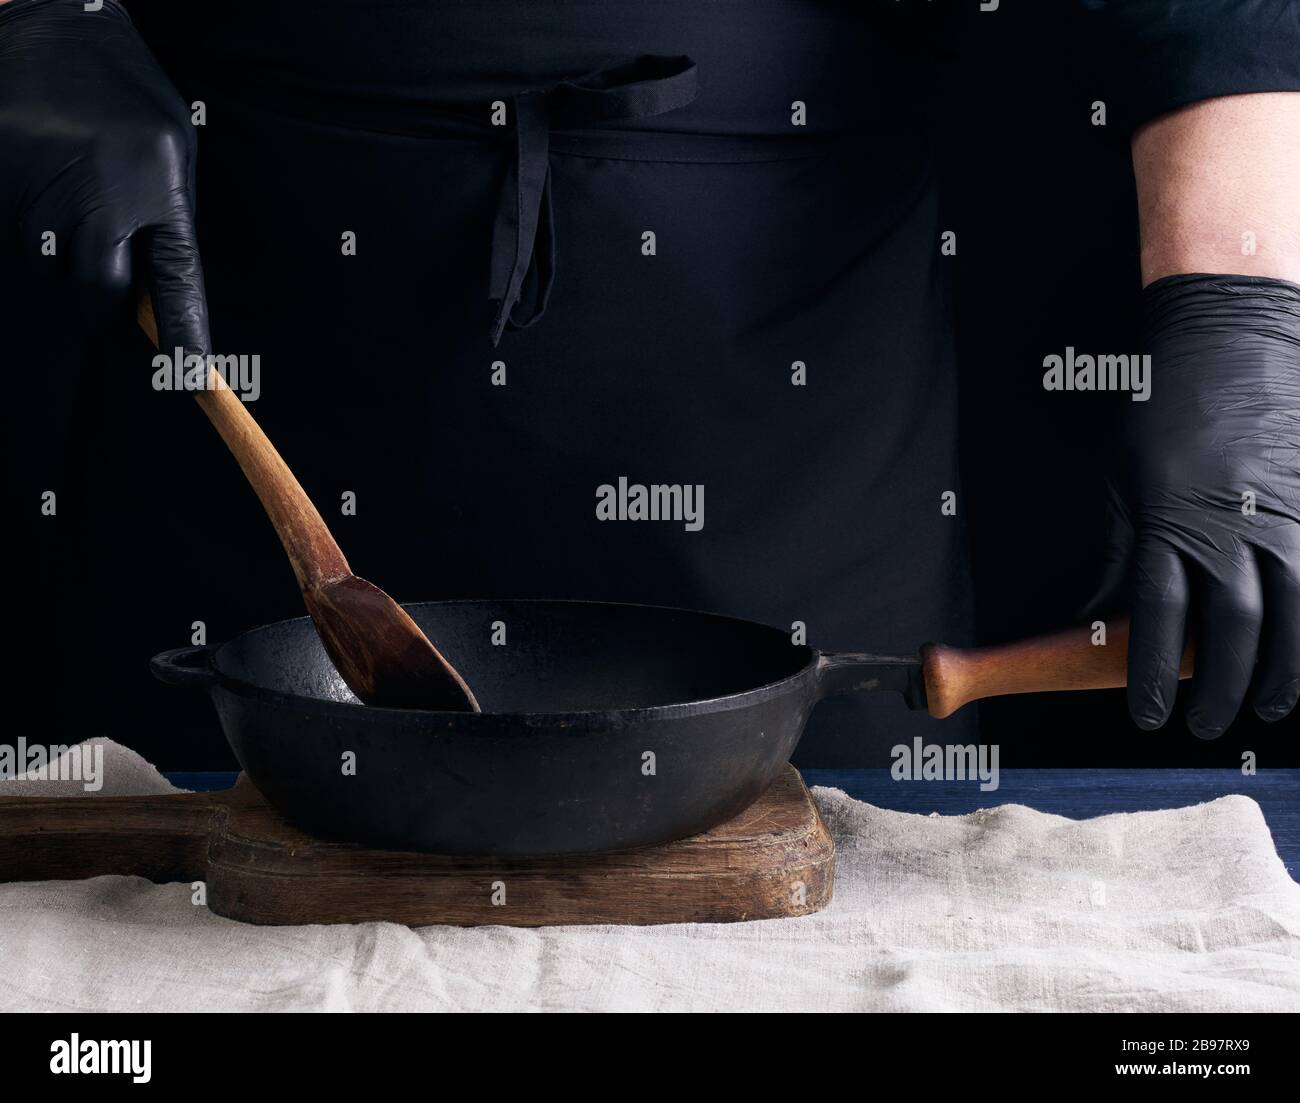 https://c8.alamy.com/comp/2B97RX9/cook-in-black-uniform-and-latex-gloves-stirs-a-vintage-wooden-spoon-food-in-a-cast-iron-pan-with-a-handle-dark-background-2B97RX9.jpg